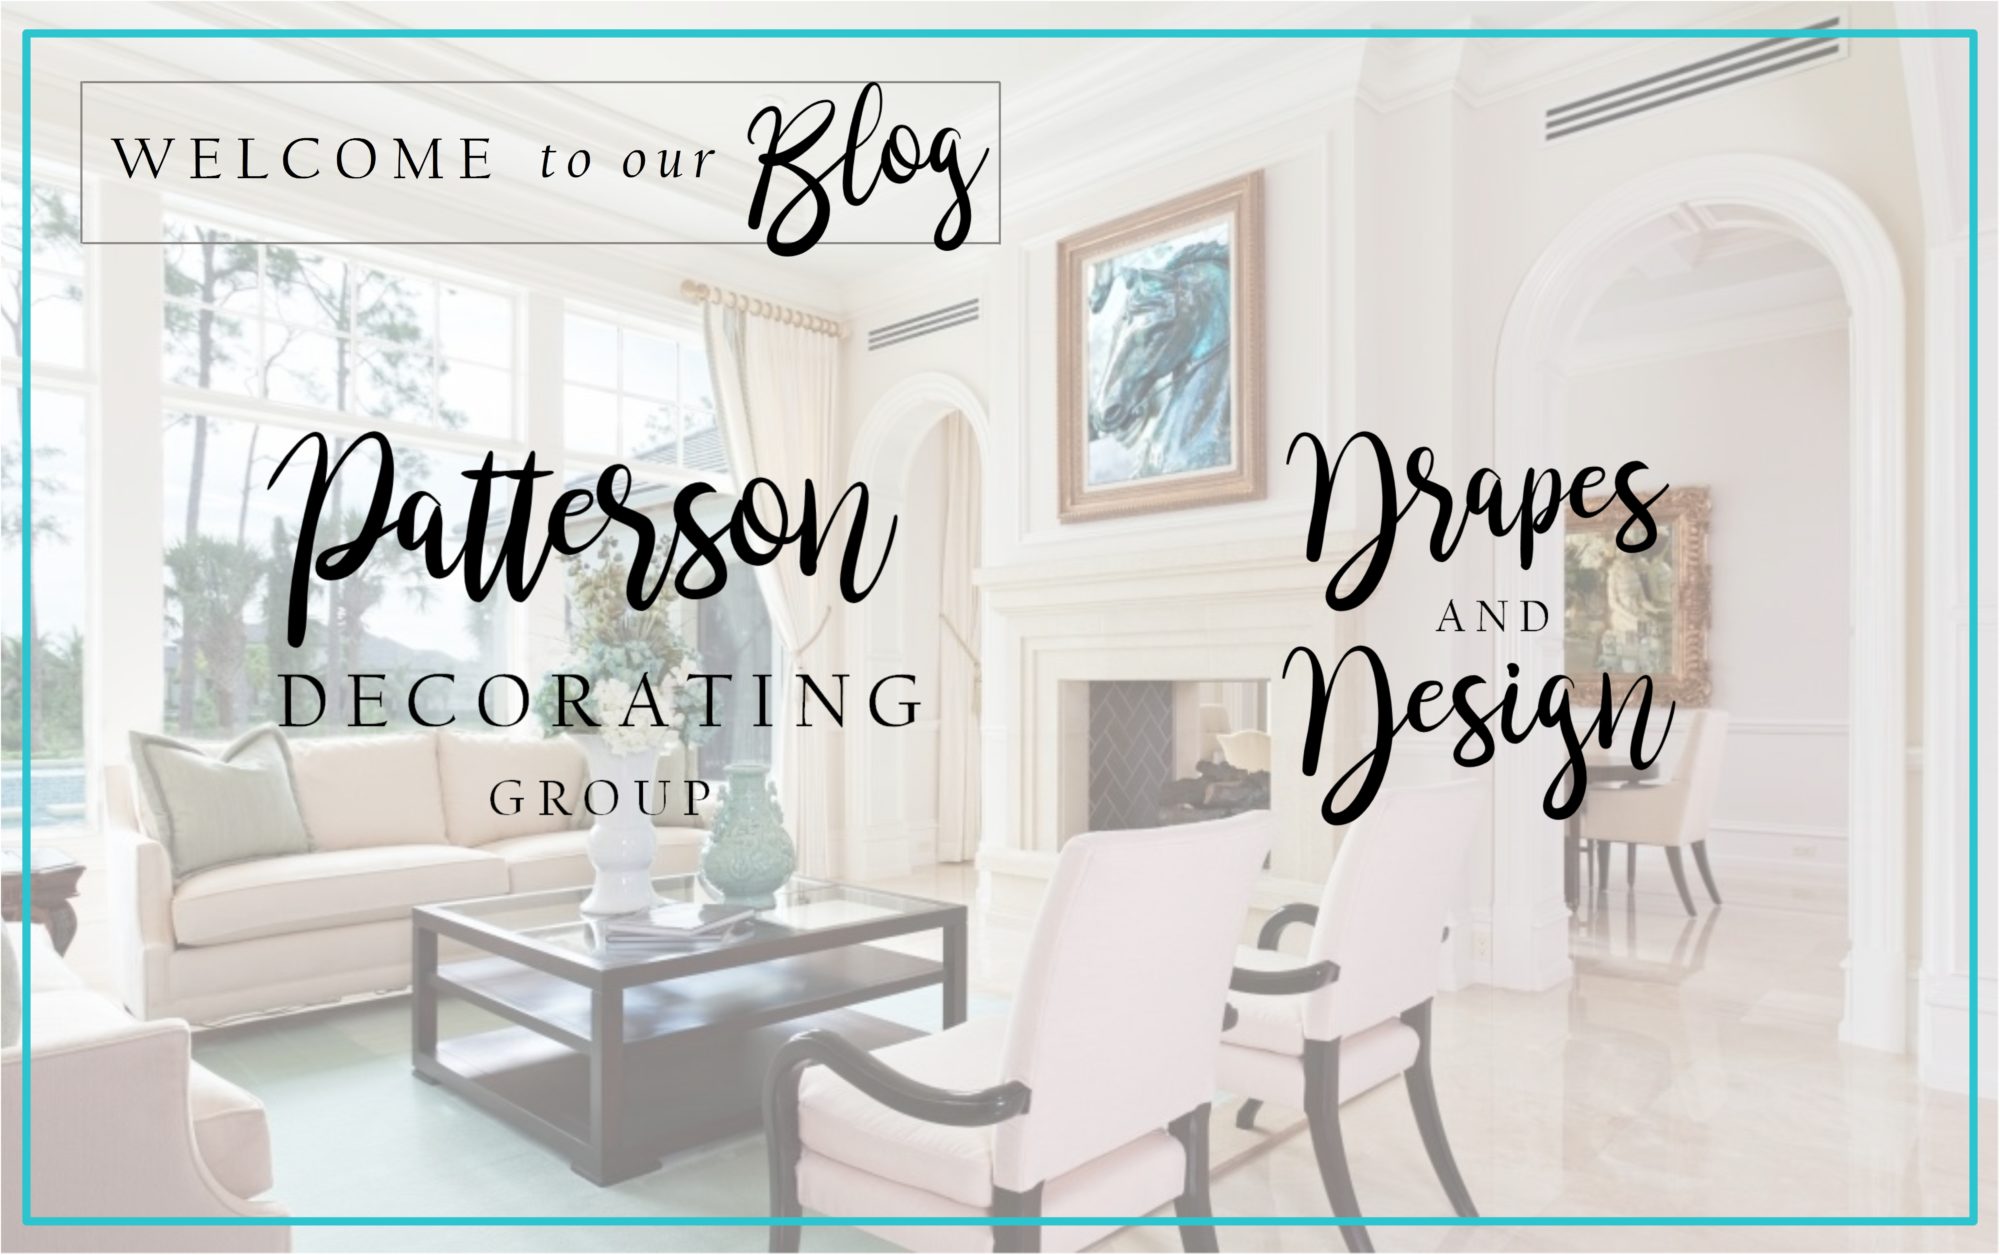 Patterson Decorating Group & Drapes and Design Blog